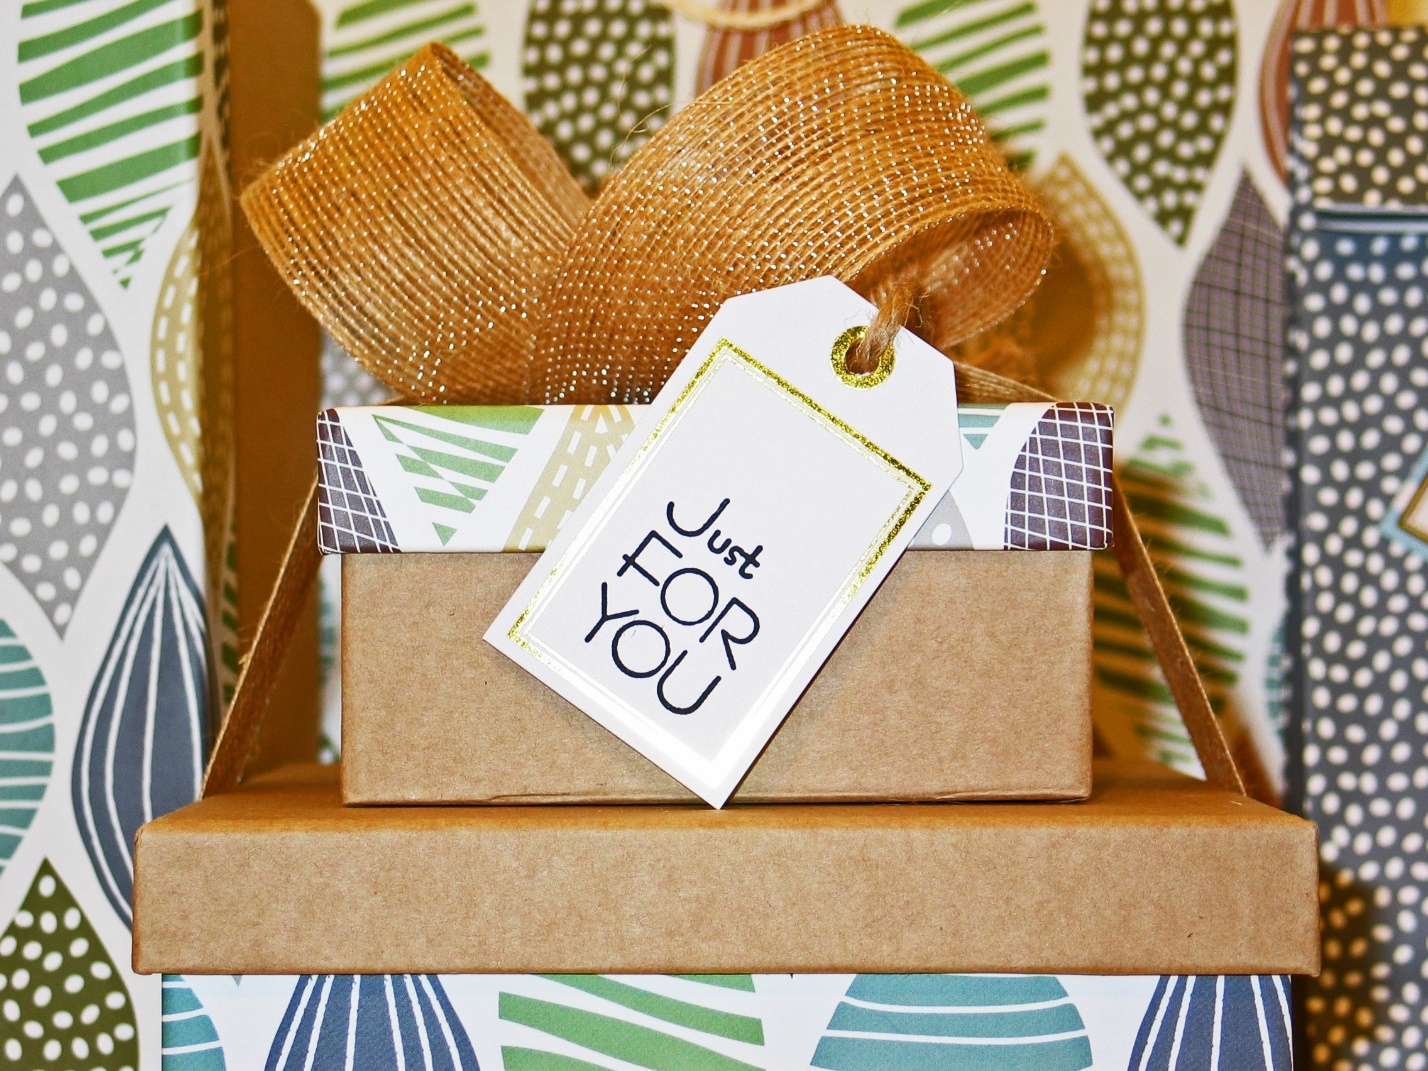 6 Ways to Make Your Gifts More Thoughtful for Anyone in Your Life